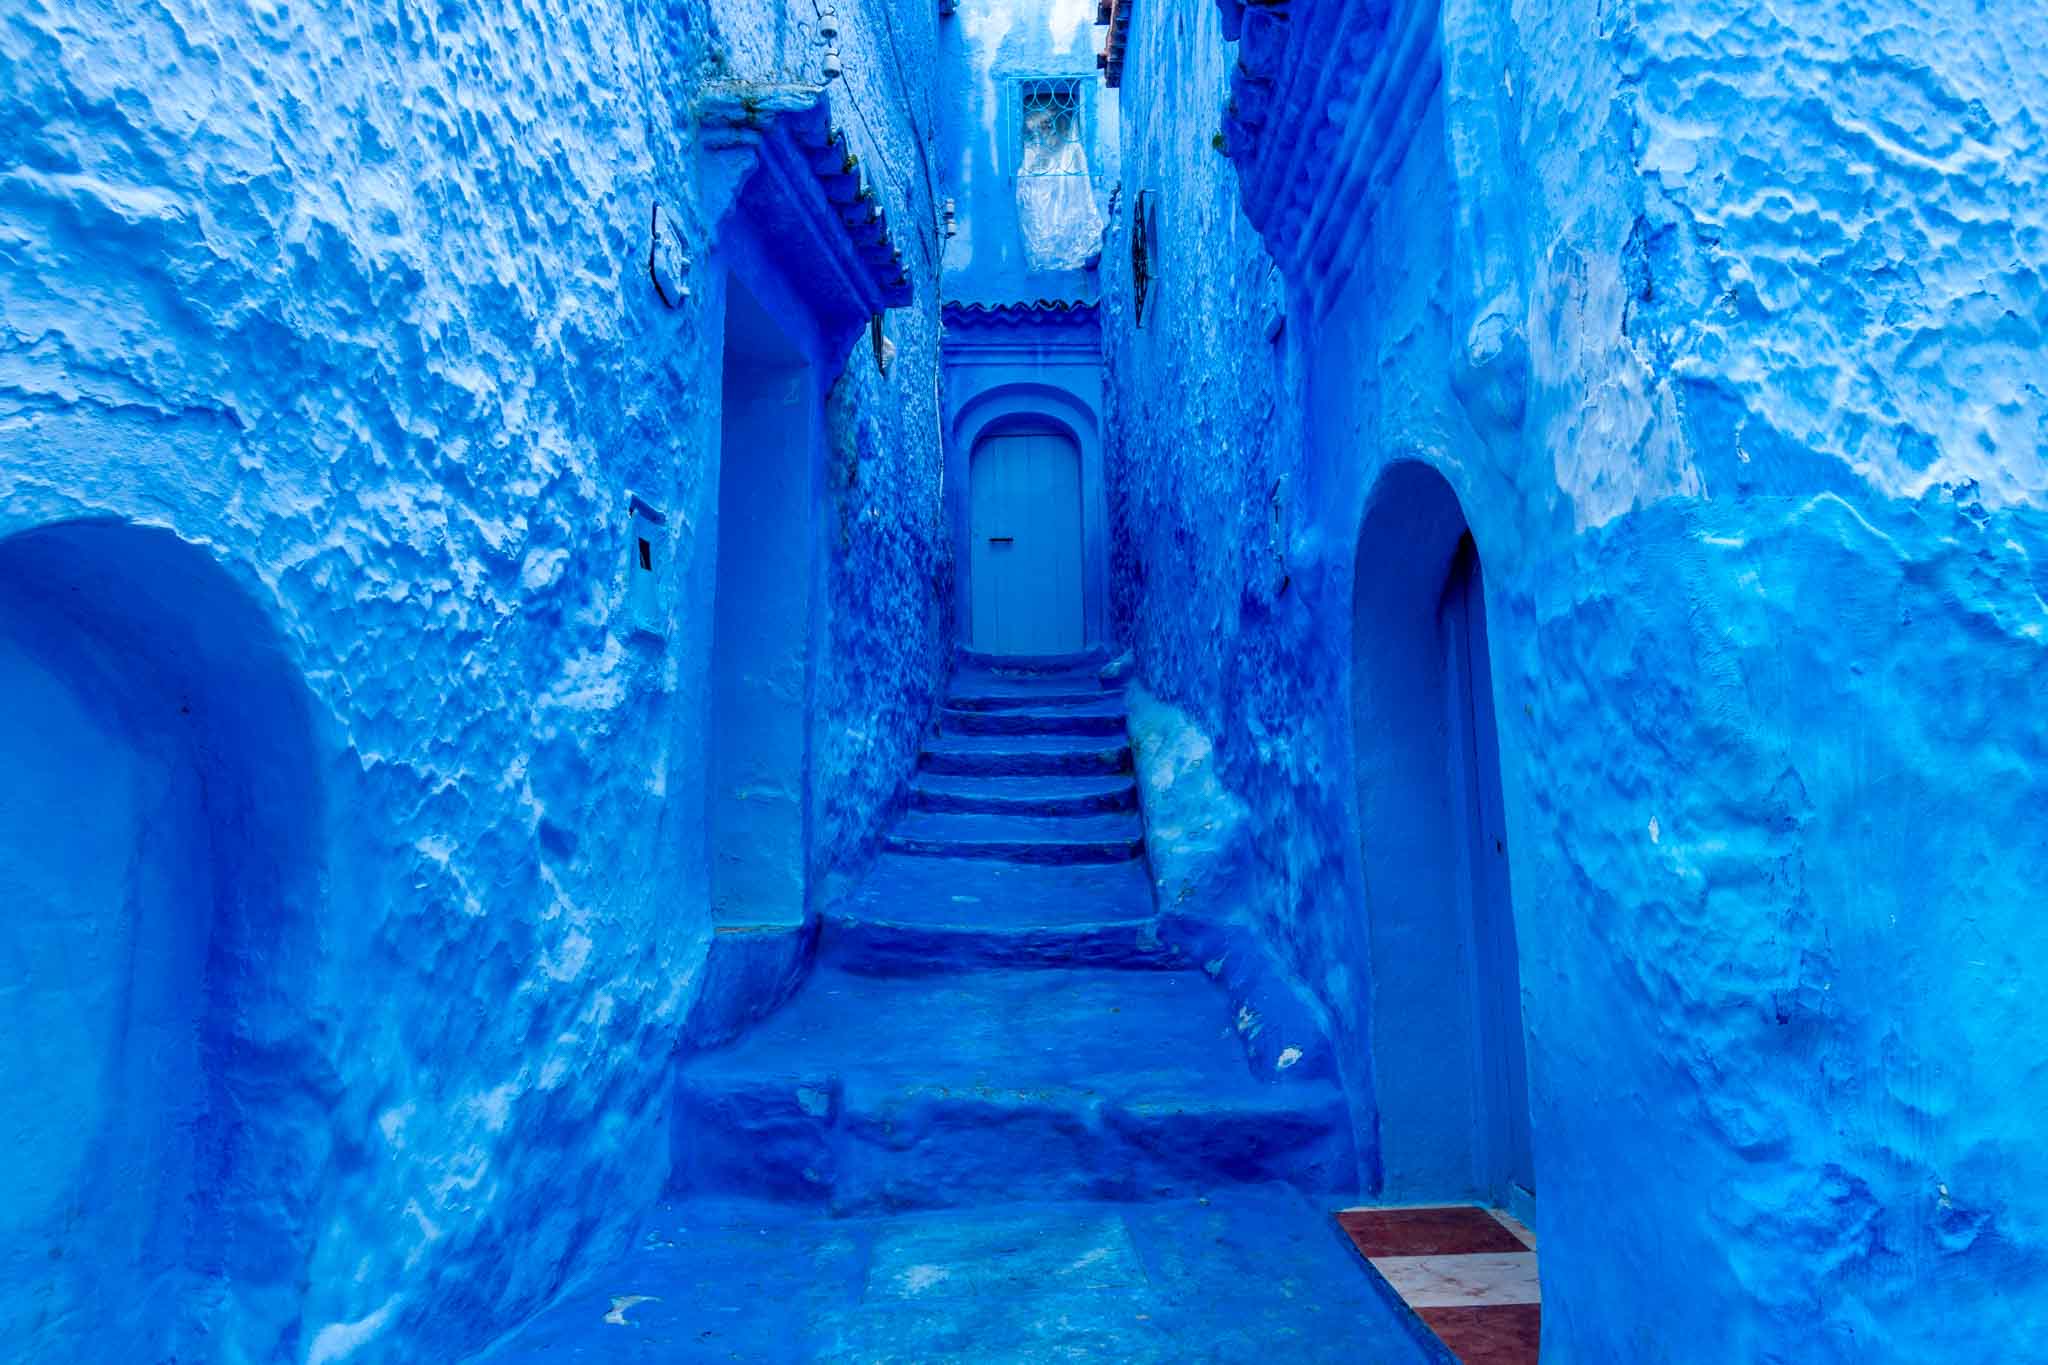 Doorway in the blue city Chefchaouen Morocco